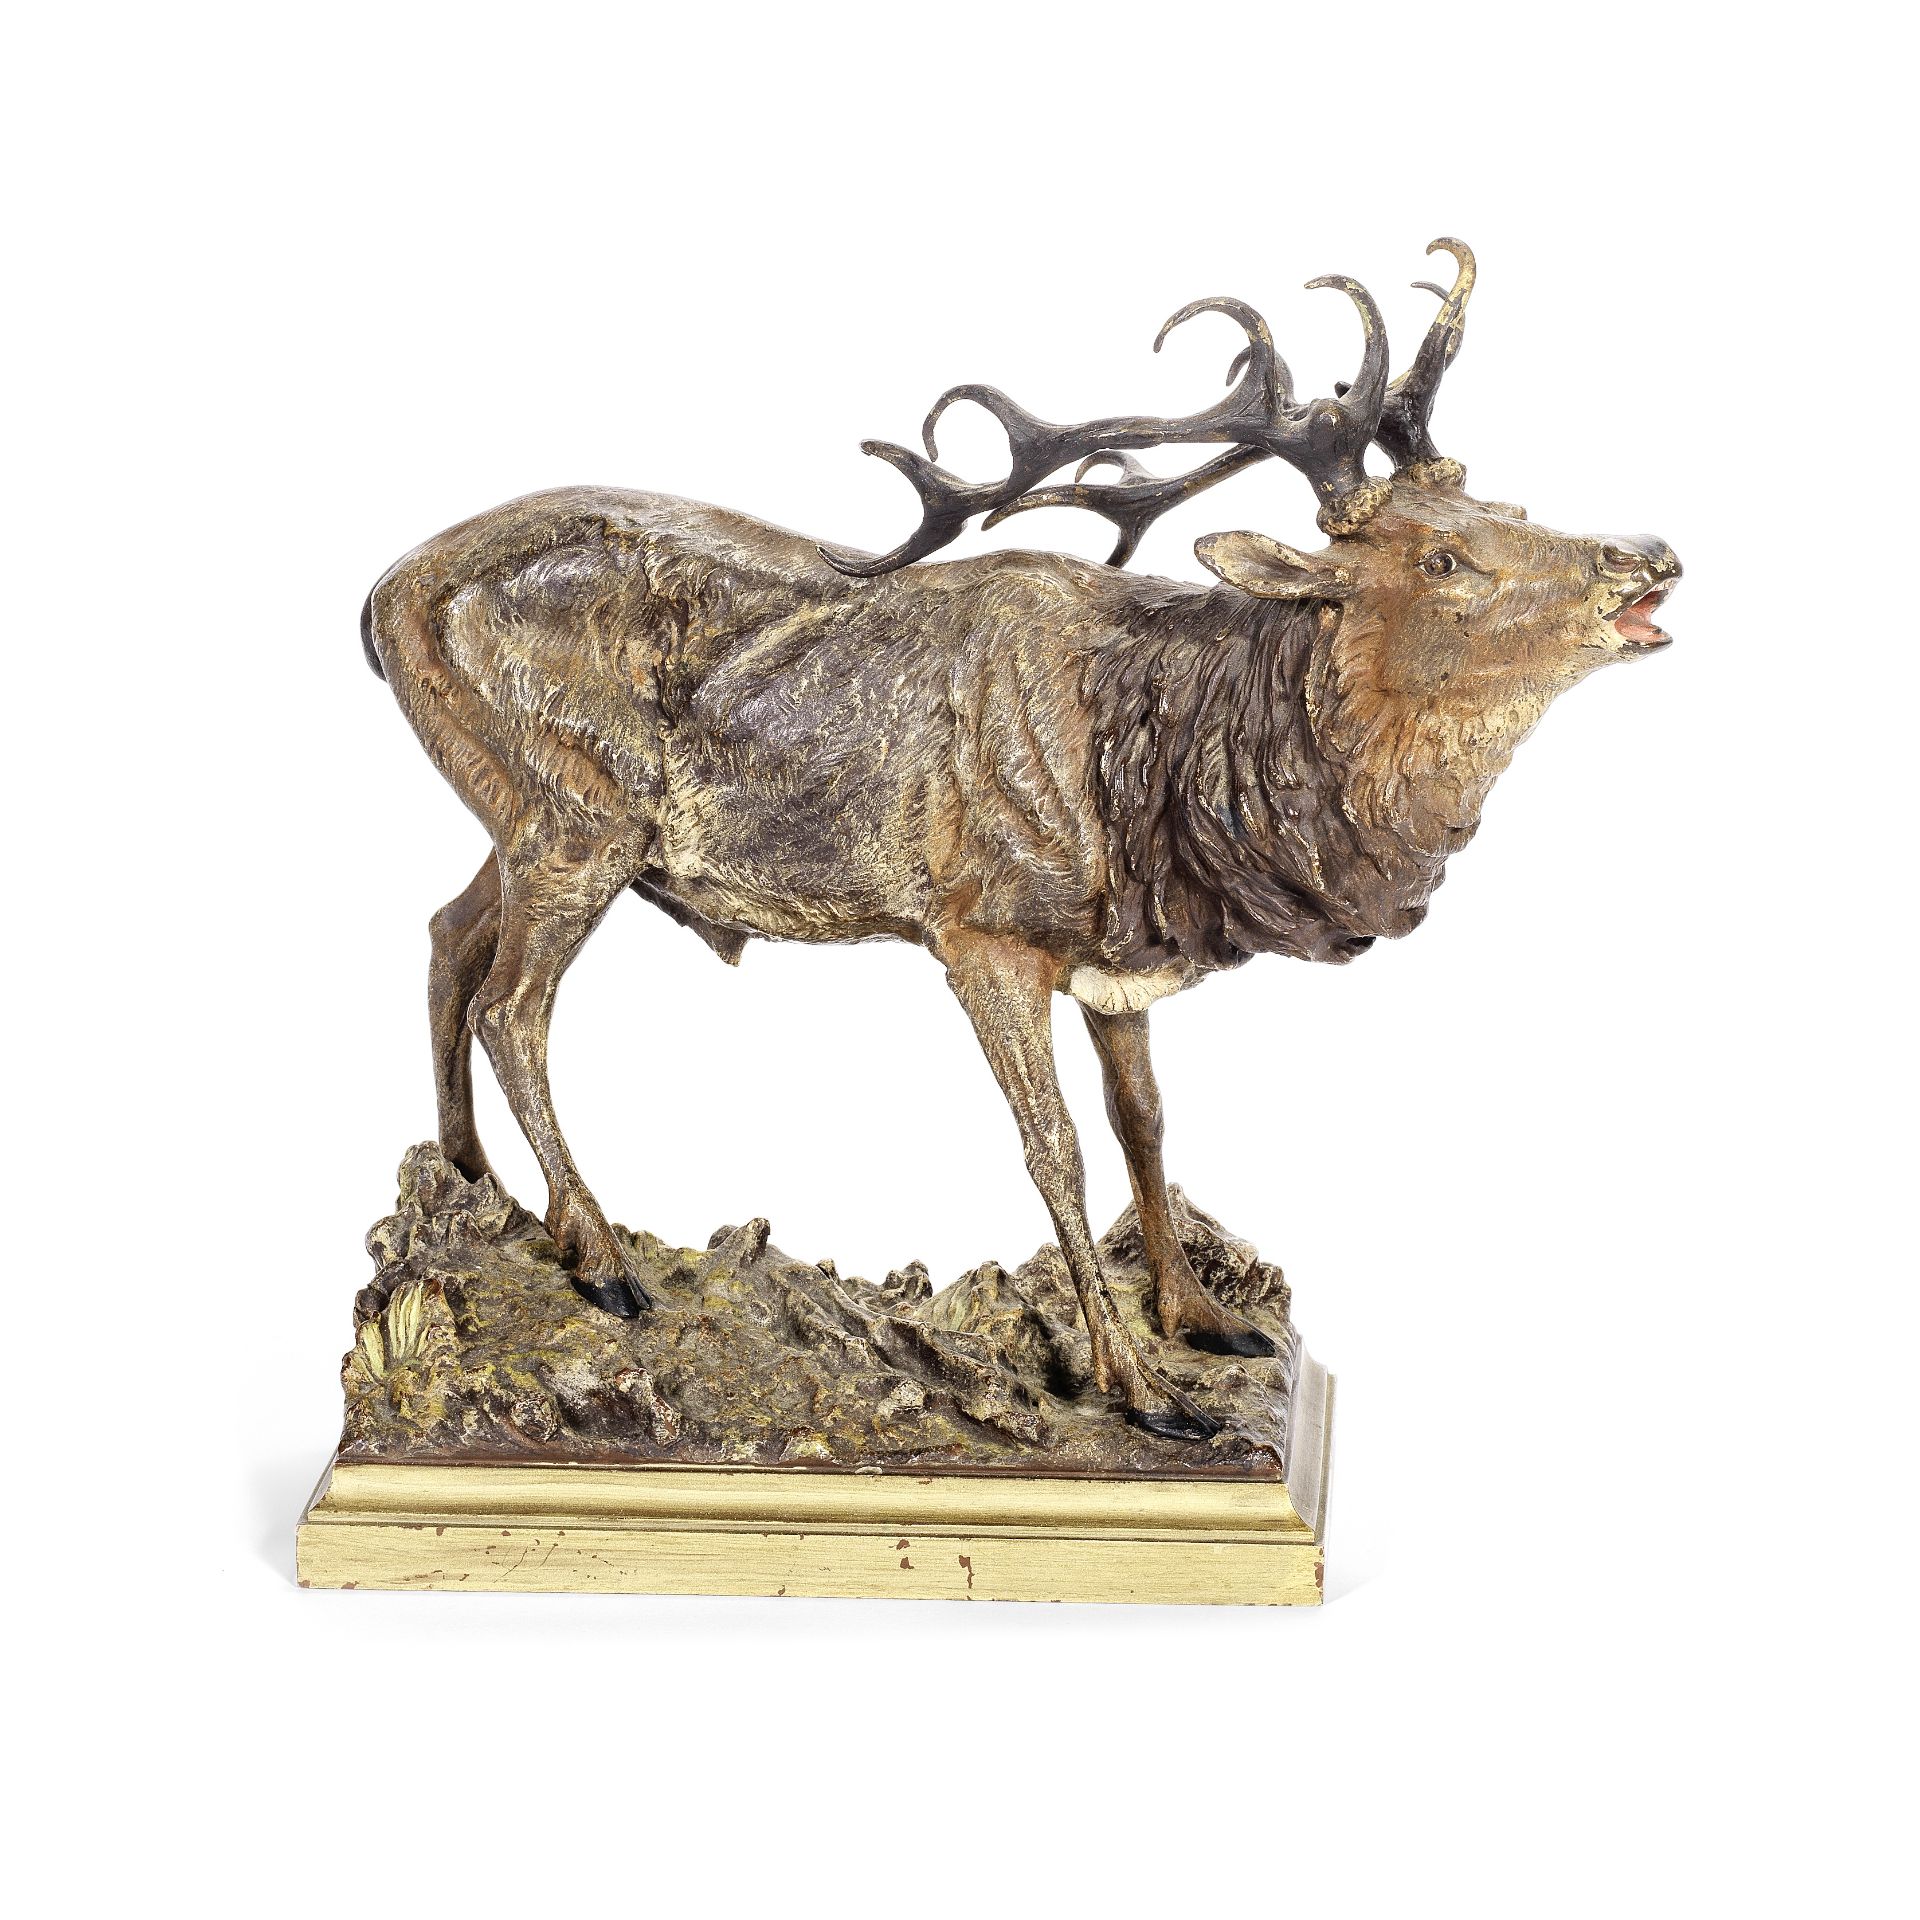 Franz Bergman (Austrian, 1861-1936): A cold painted bronze model of a stag on integral base